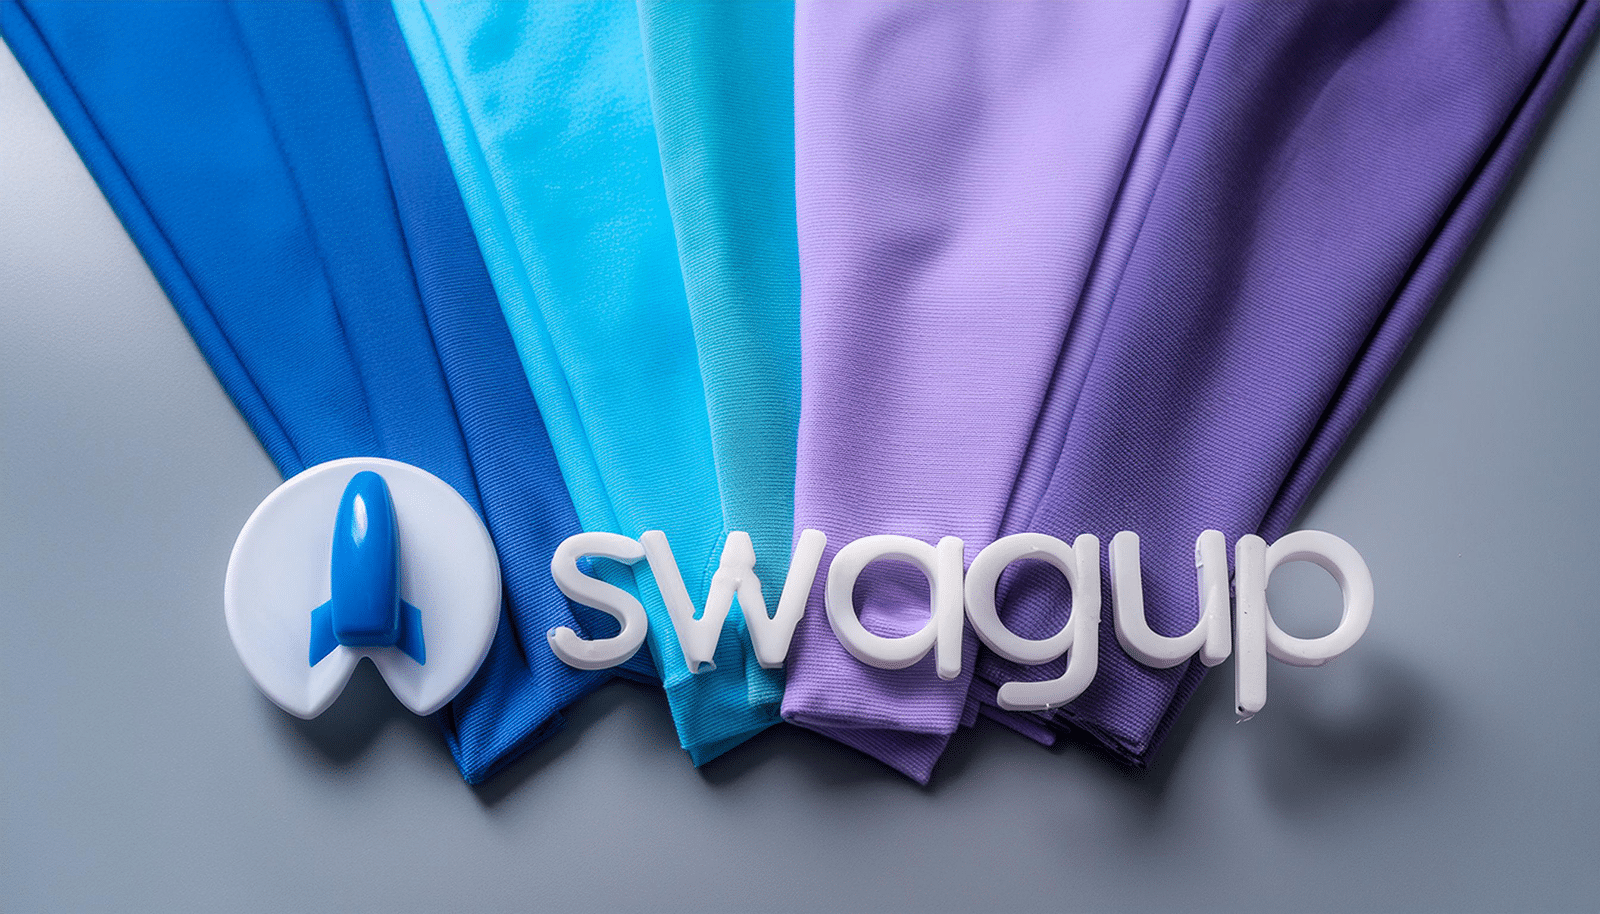 logo of swagup with 5 different colored fabrics behind it